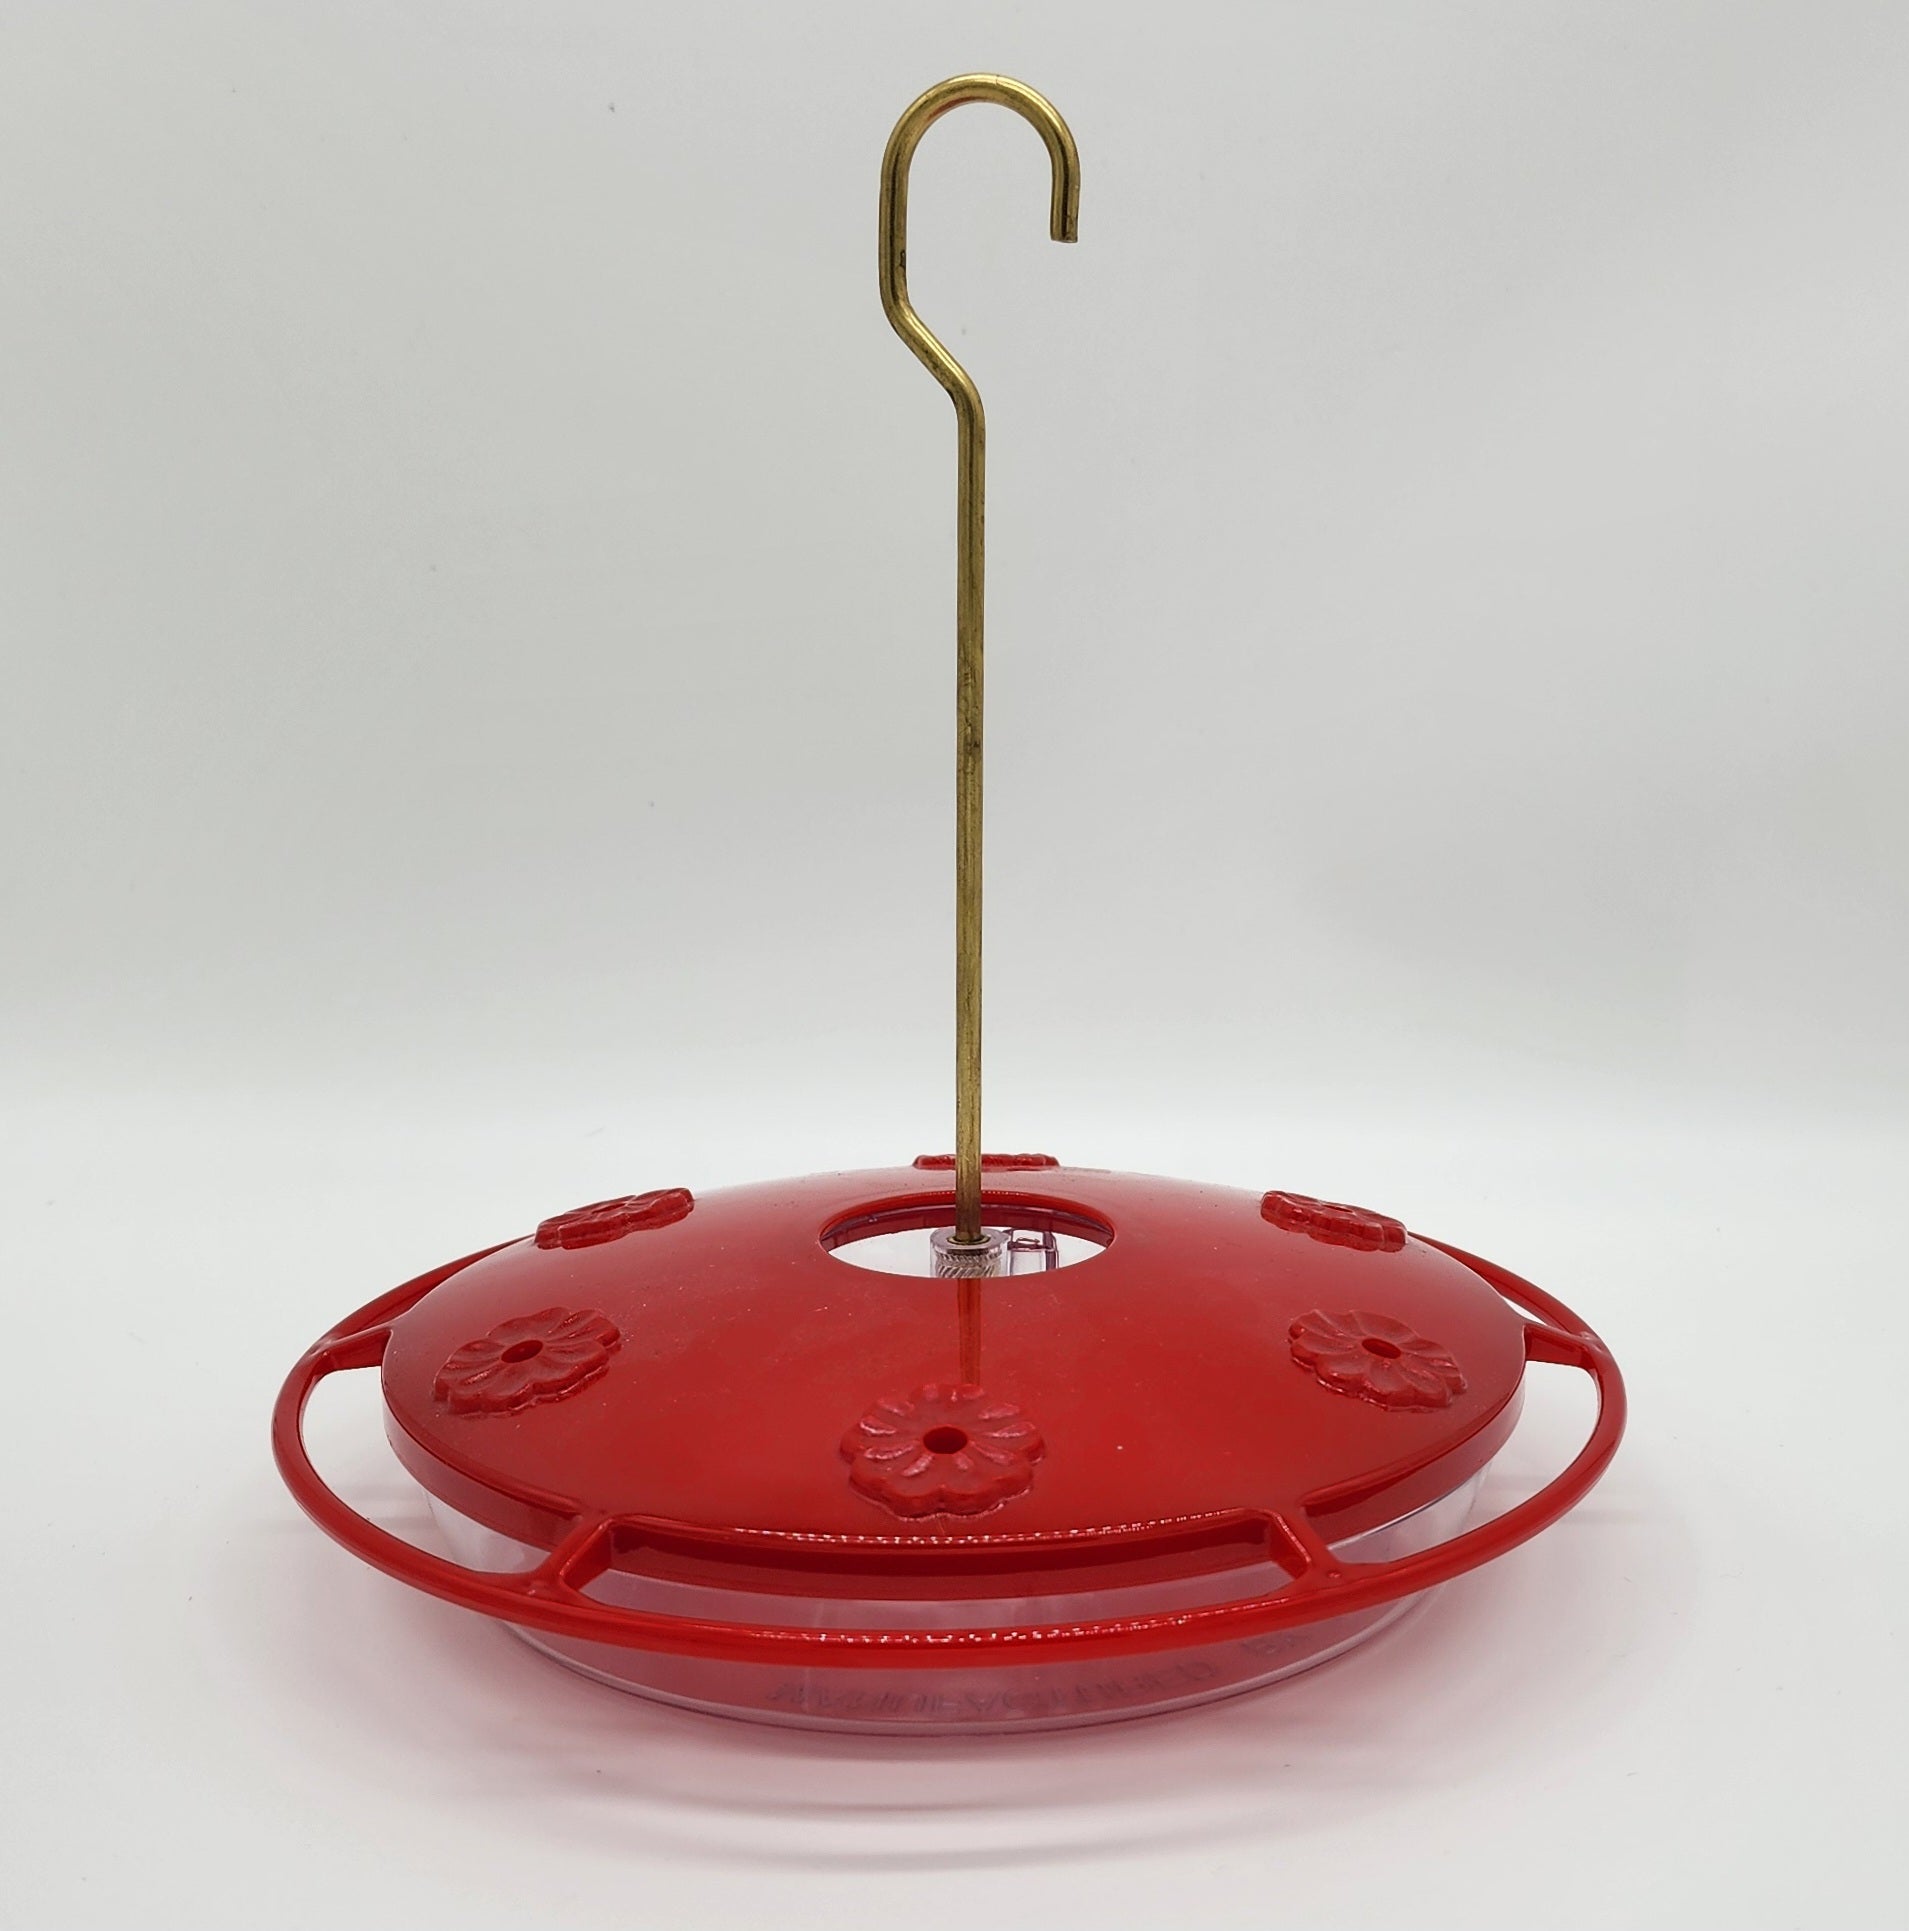 Saucer type Humming bird feeder. Red lid with clear dish